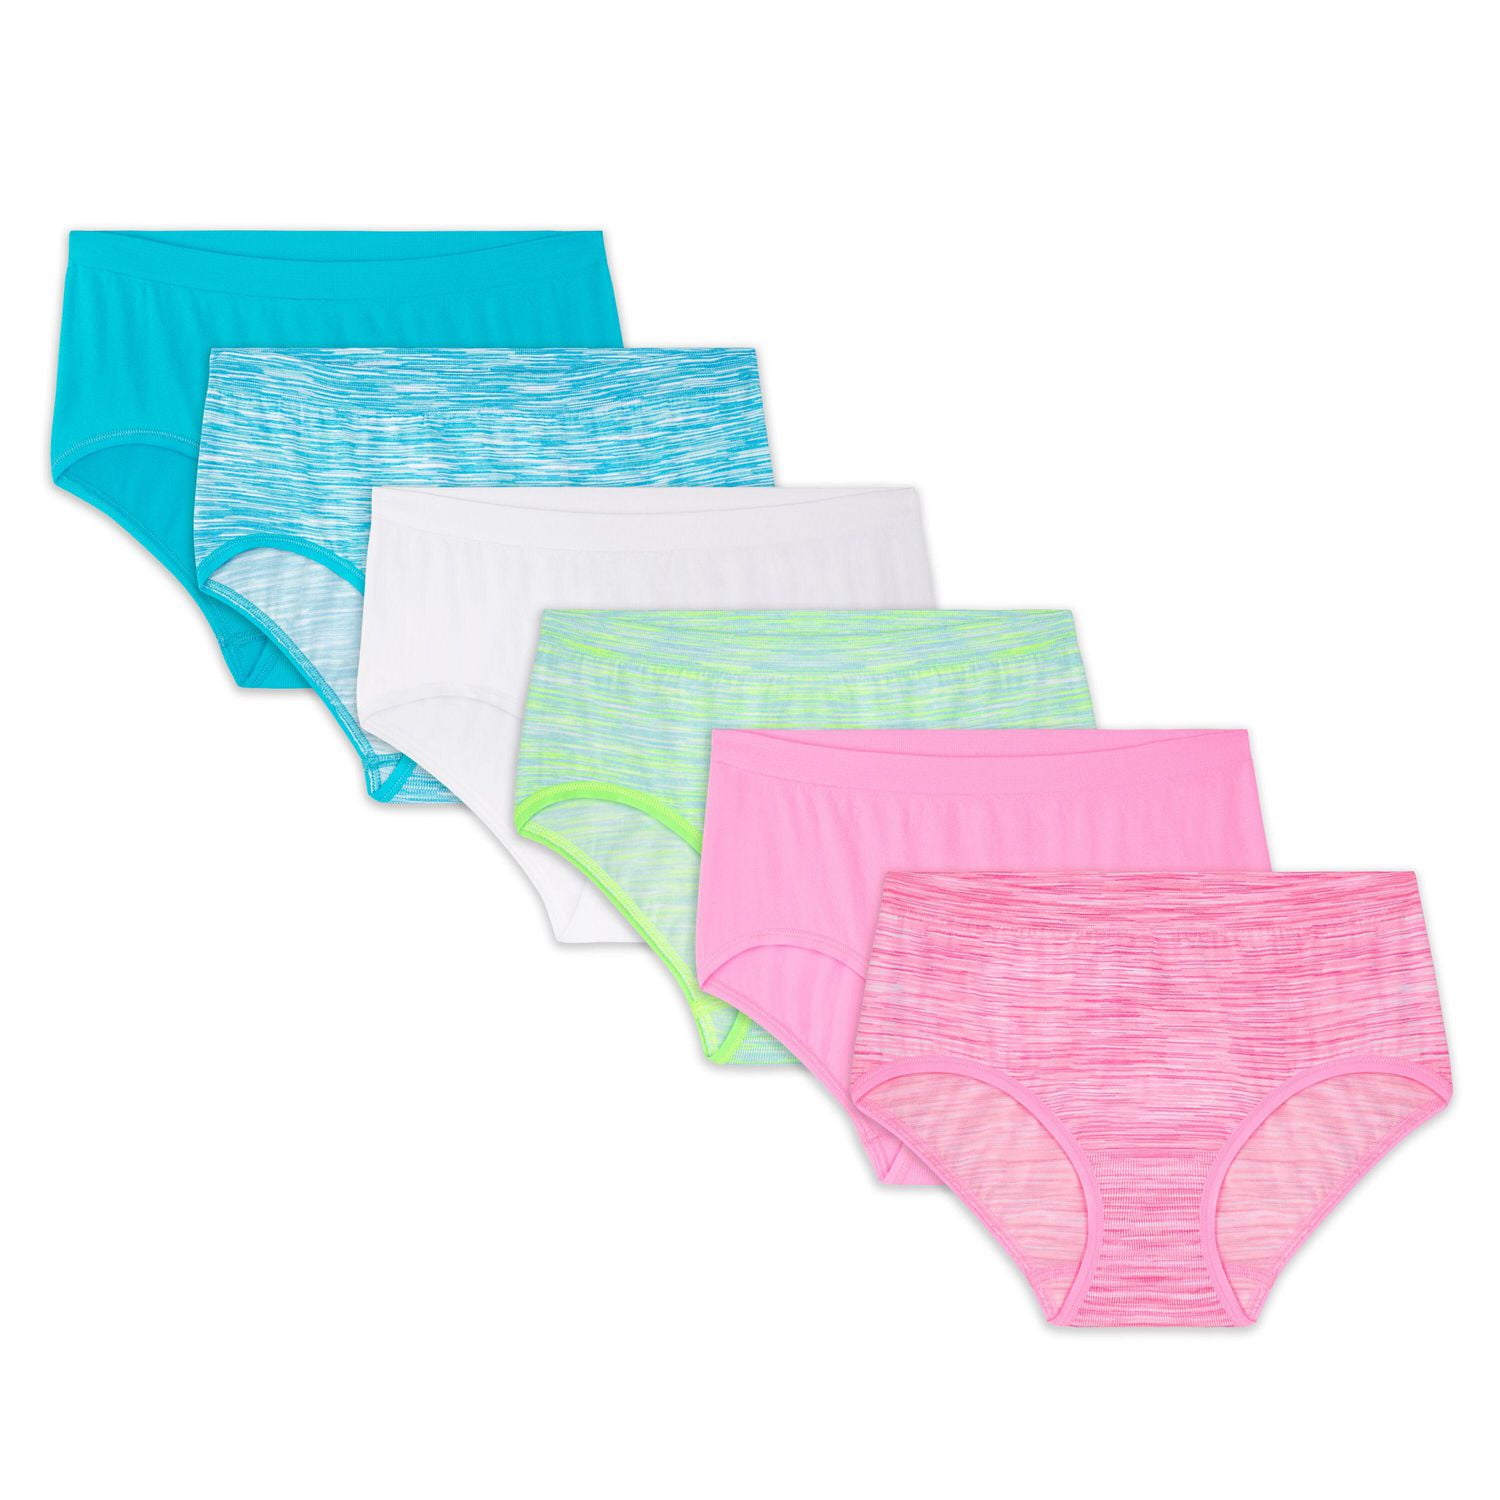 Fruit of the Loom Toddler Girls 10 Pack Assorted Cotton Brief